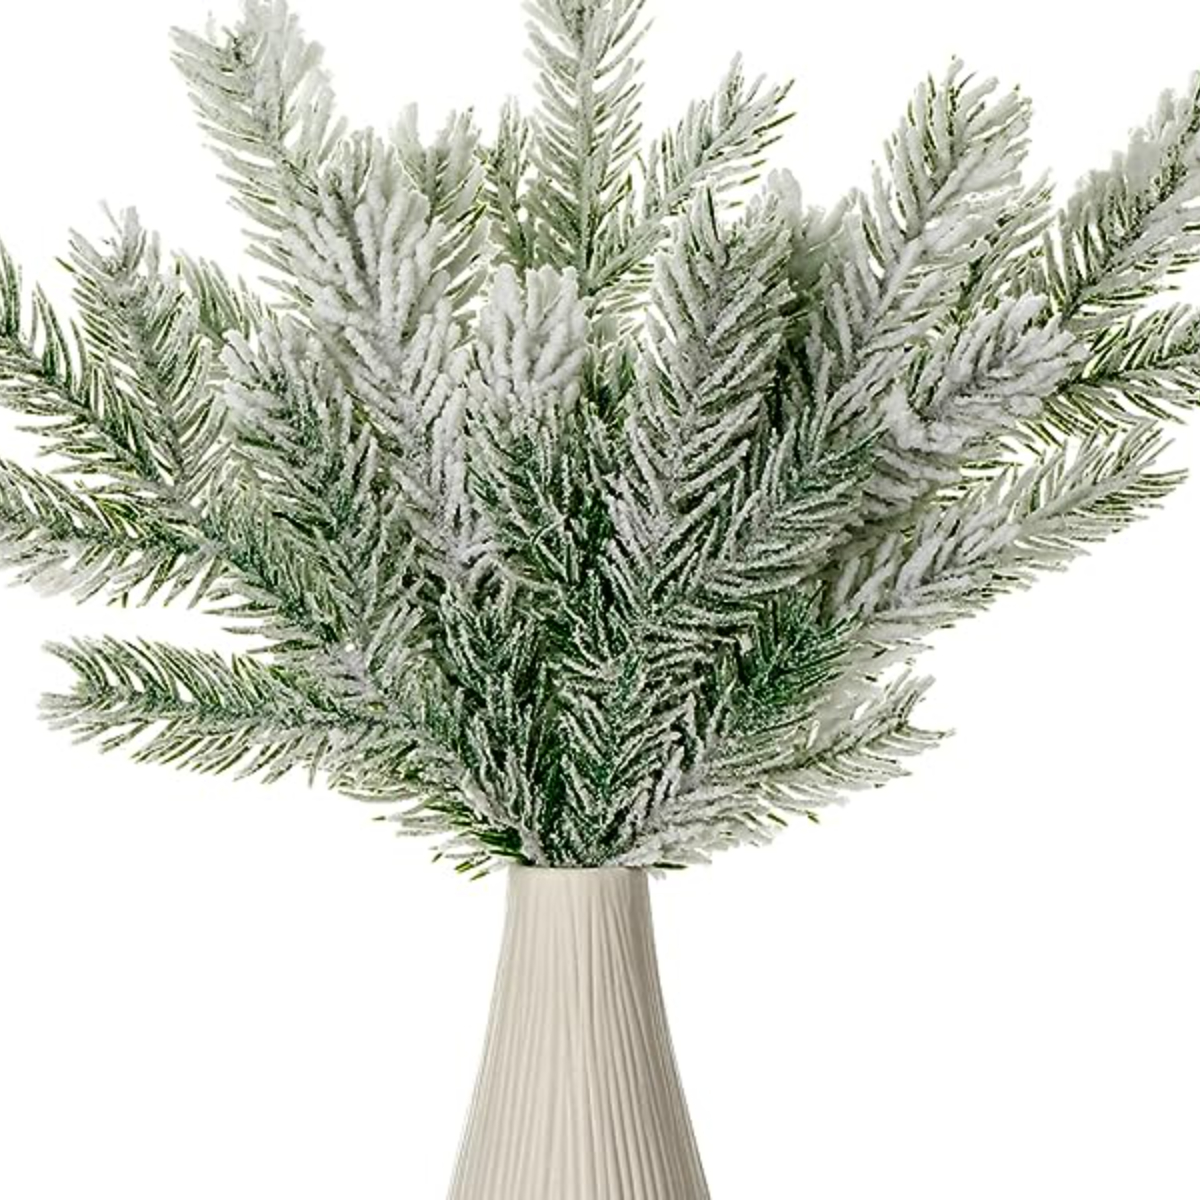 Hotop 60 Pcs Snowy Pine Tree Picks Artificial Pine Needles Branches Winter  Fake Flocked Pine Branches Christmas Greenery Sprays for Crafts Wreath